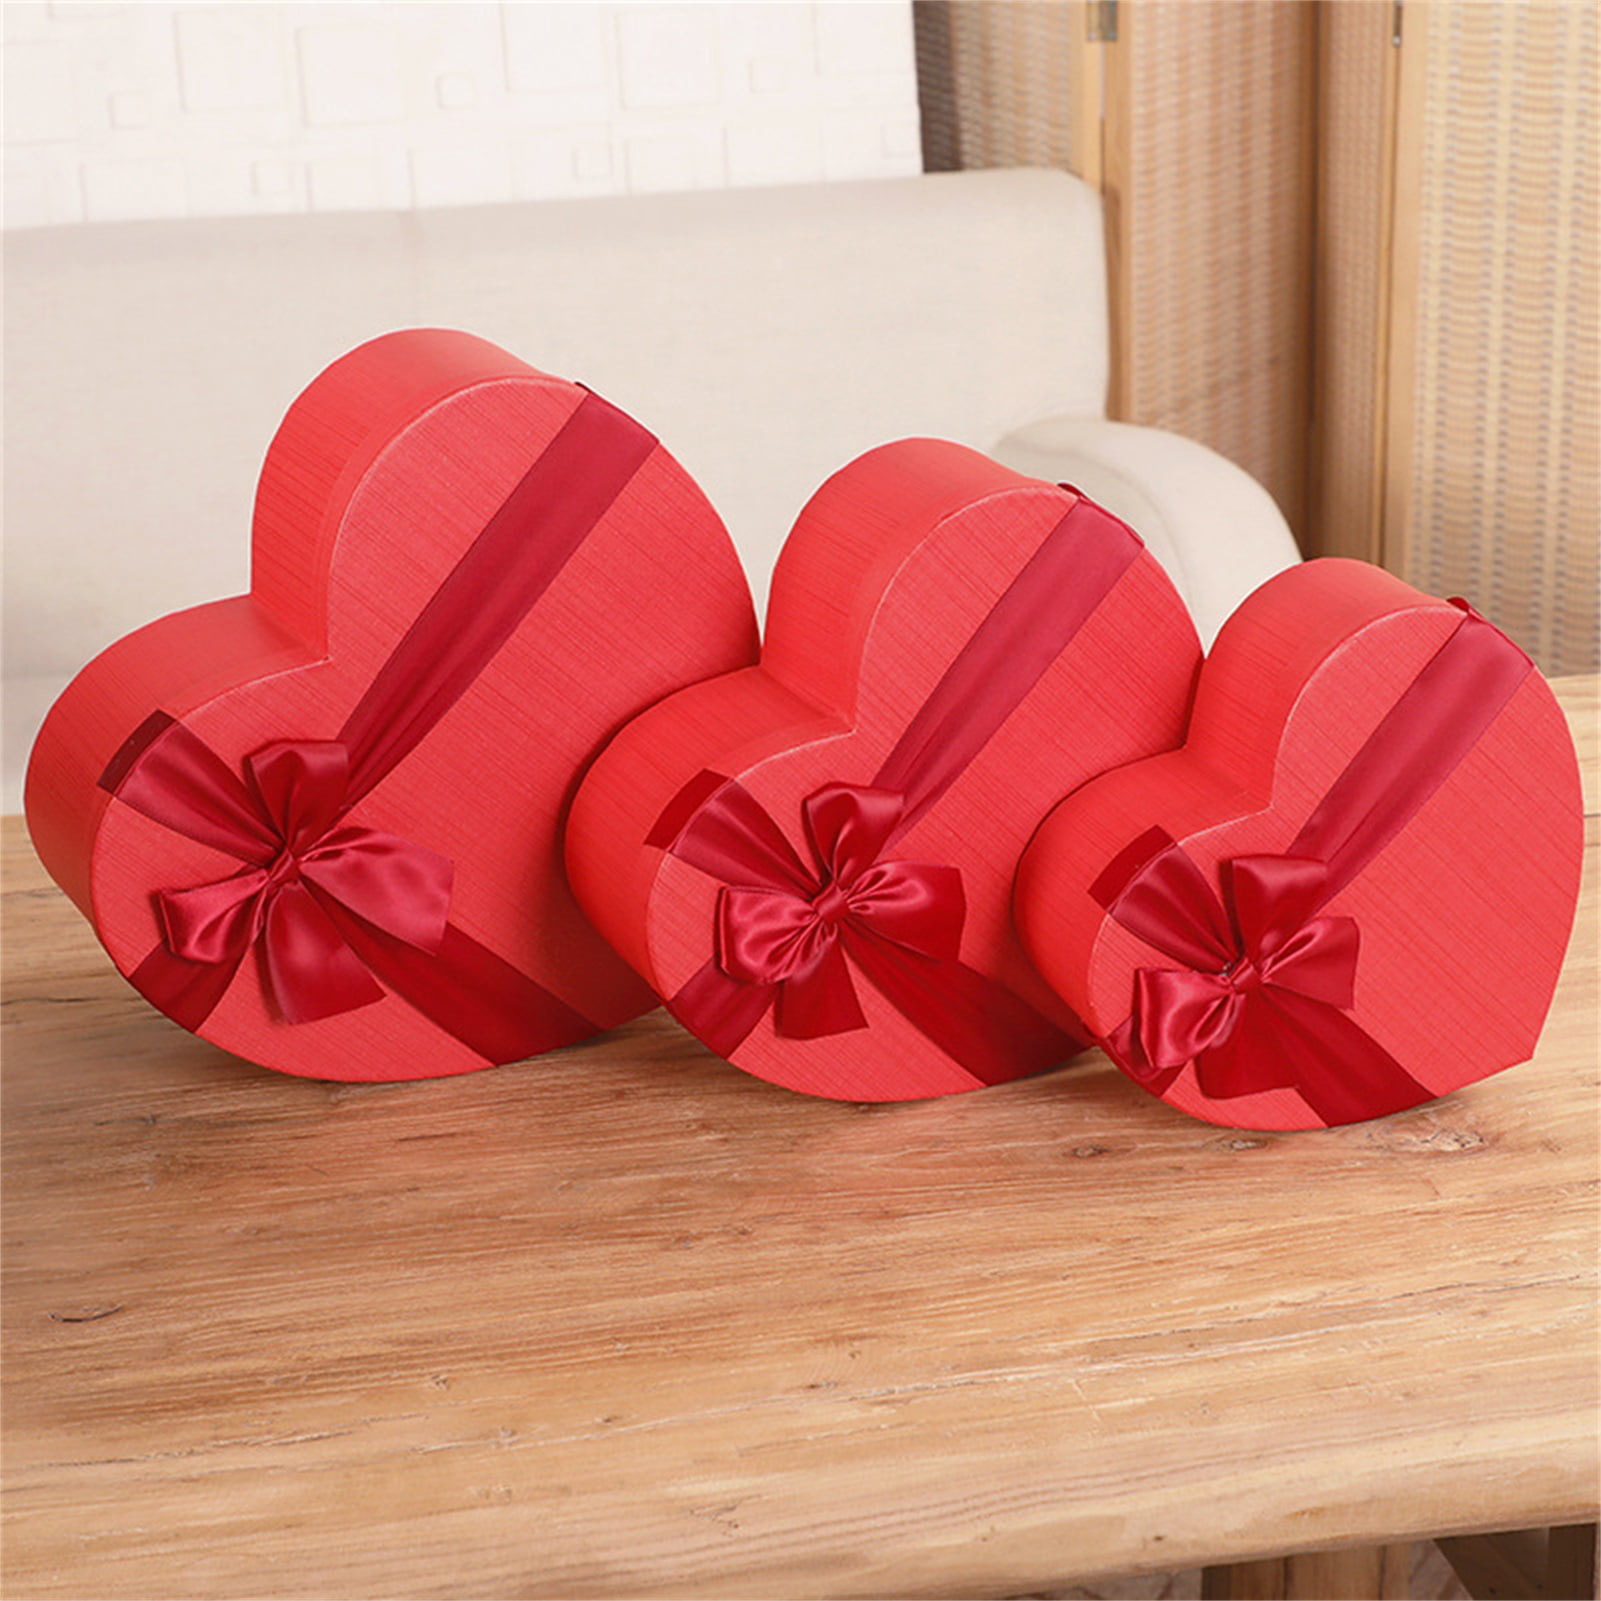 Visland 5PCS Bowknot Flower Packaging Box Rose Flower Box Paper Bag Single  Bouquet Box Valentine's Day Birthday Party Christmas Gift 